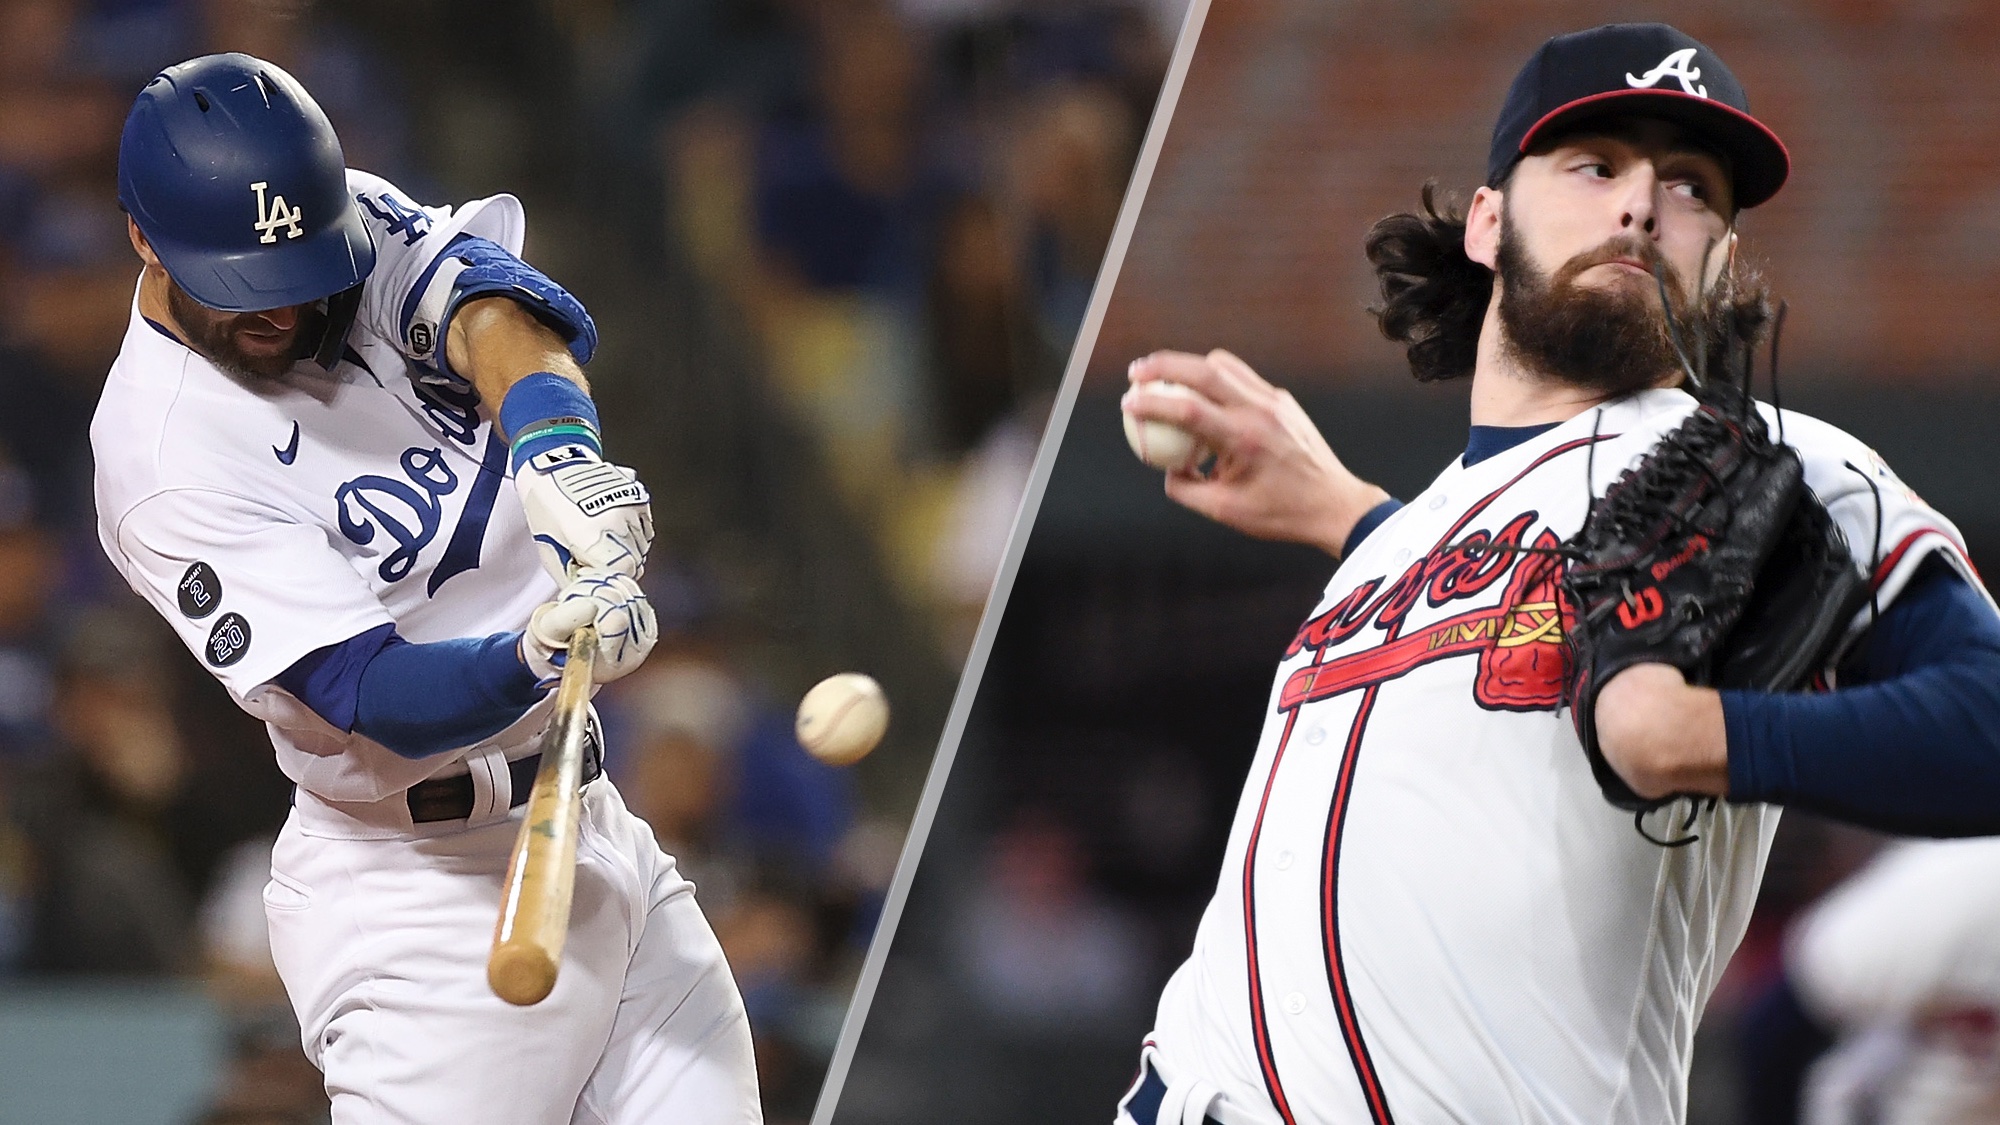 How to Watch the Braves vs. Dodgers Game: Streaming & TV Info